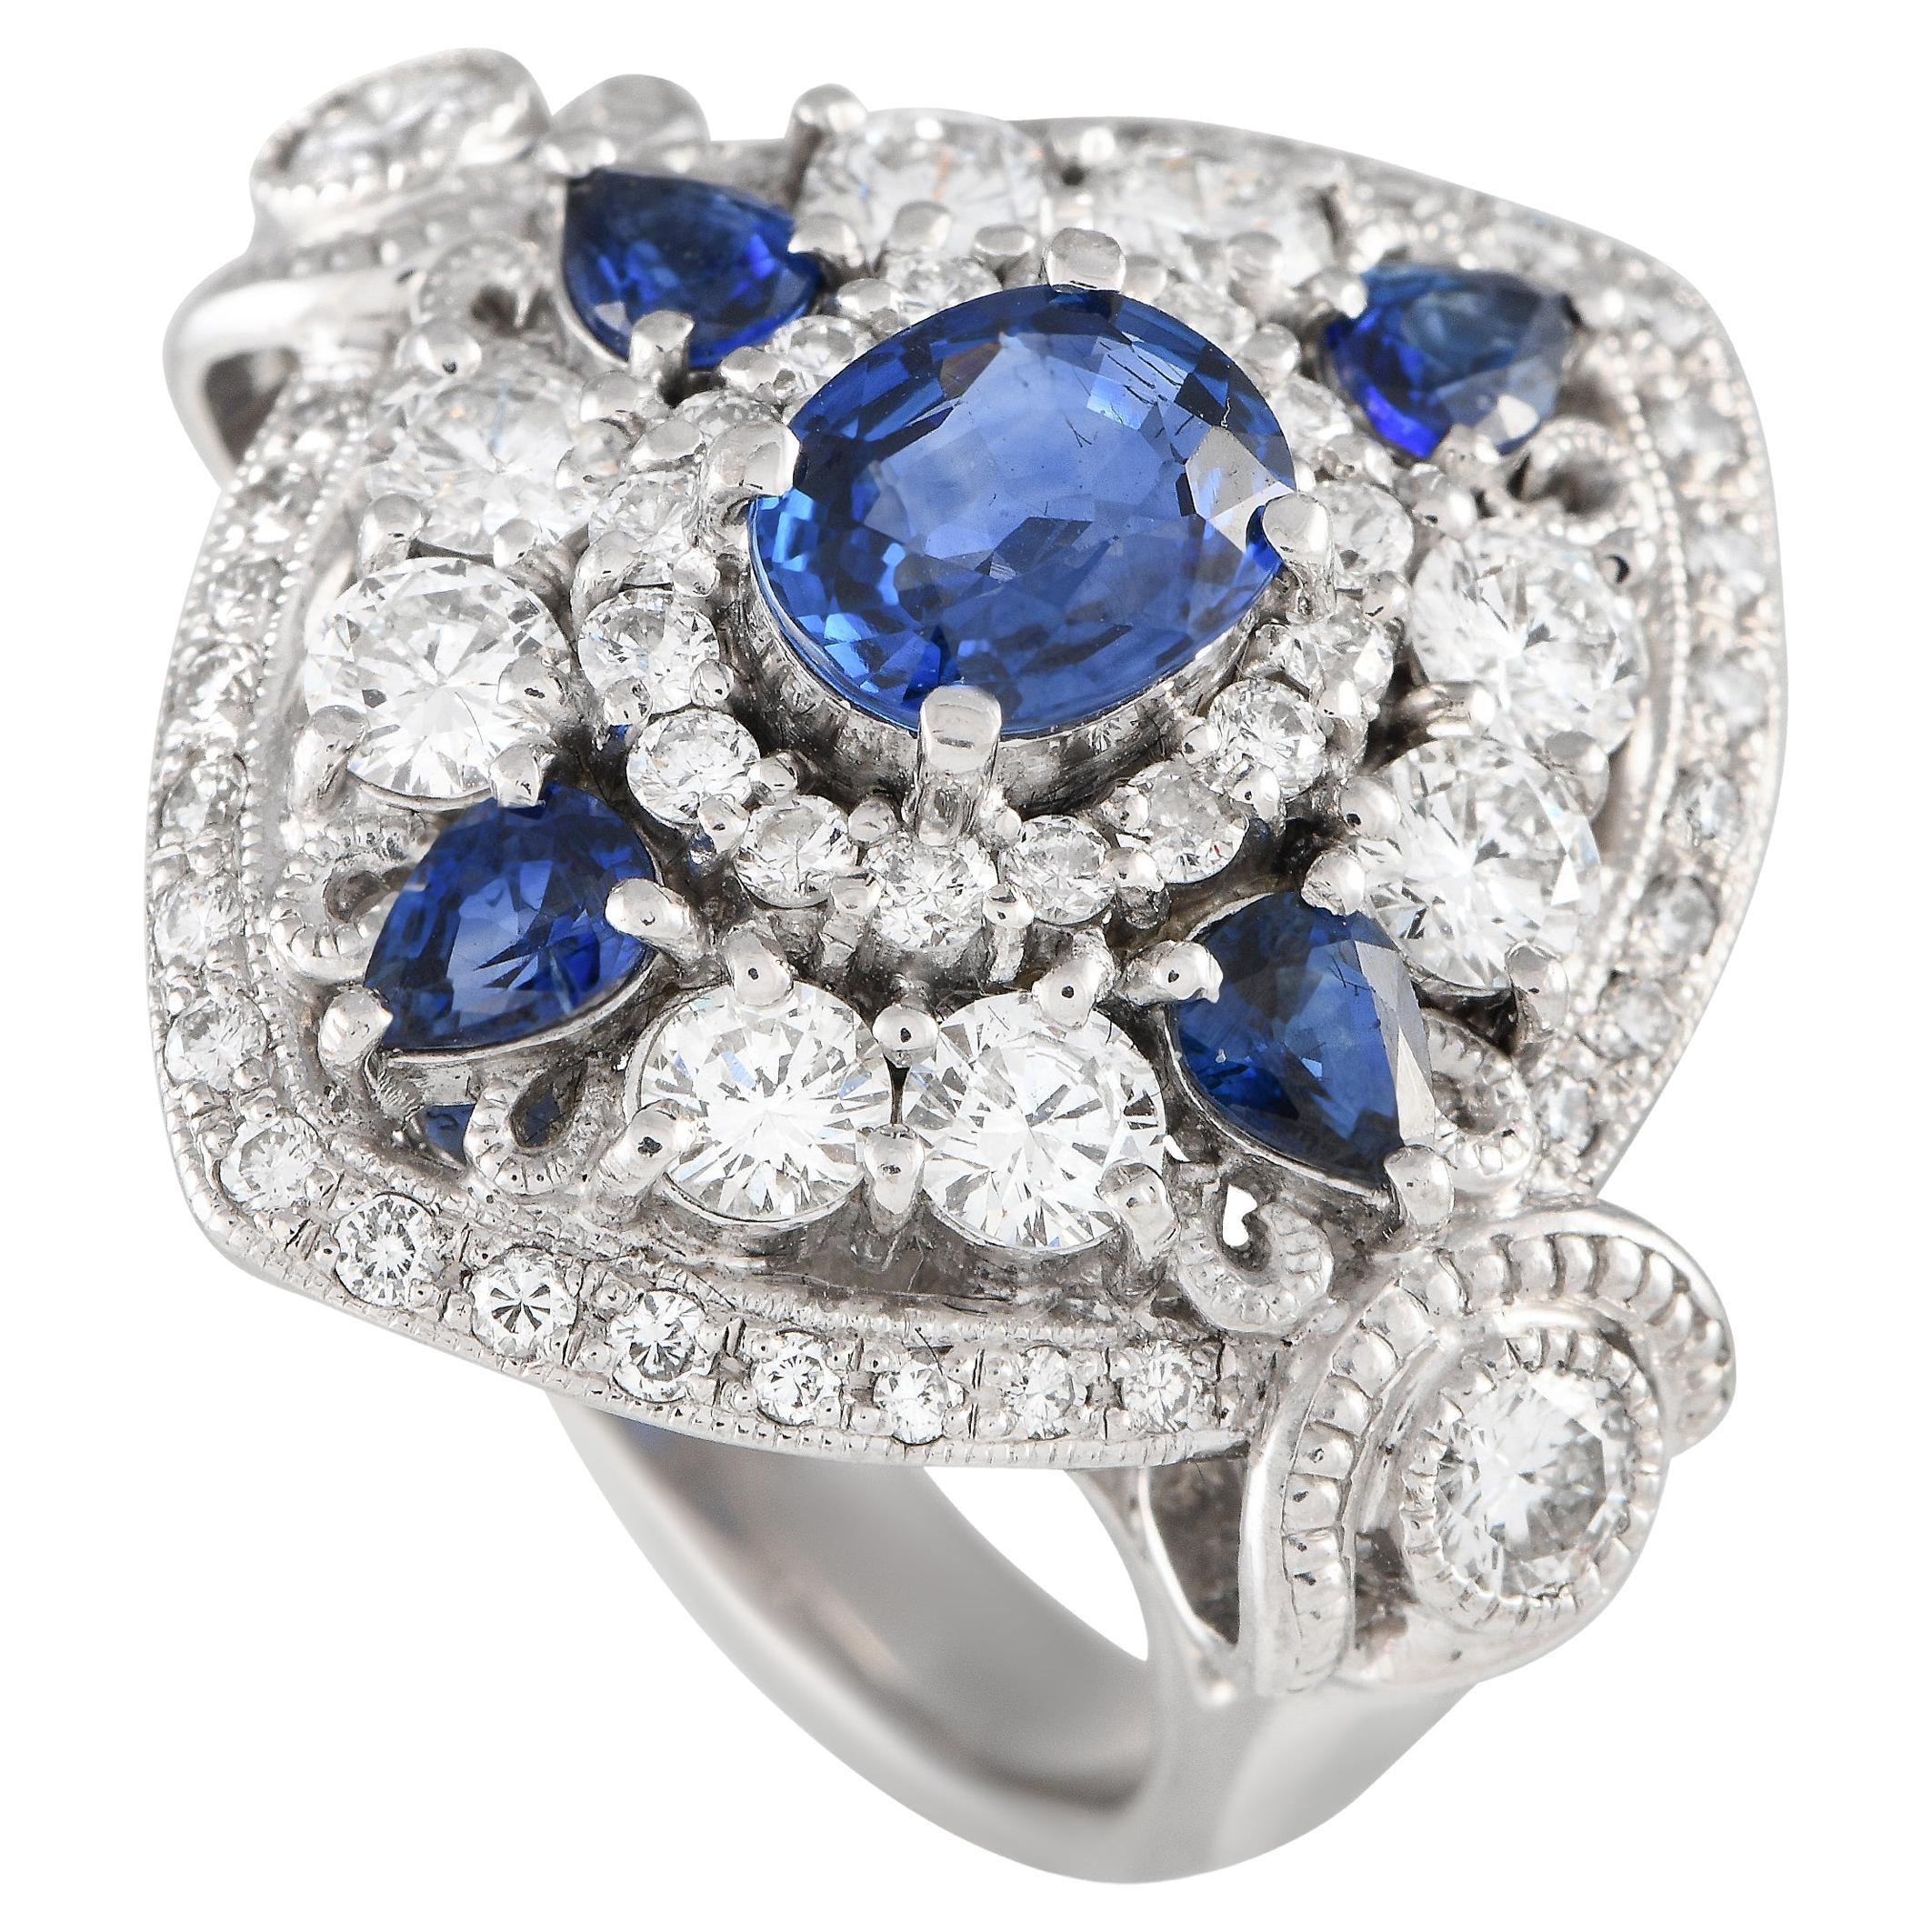 18K White Gold 1.02ct Diamond and Sapphire Art Deco Statement Ring MF04-012424 For Sale